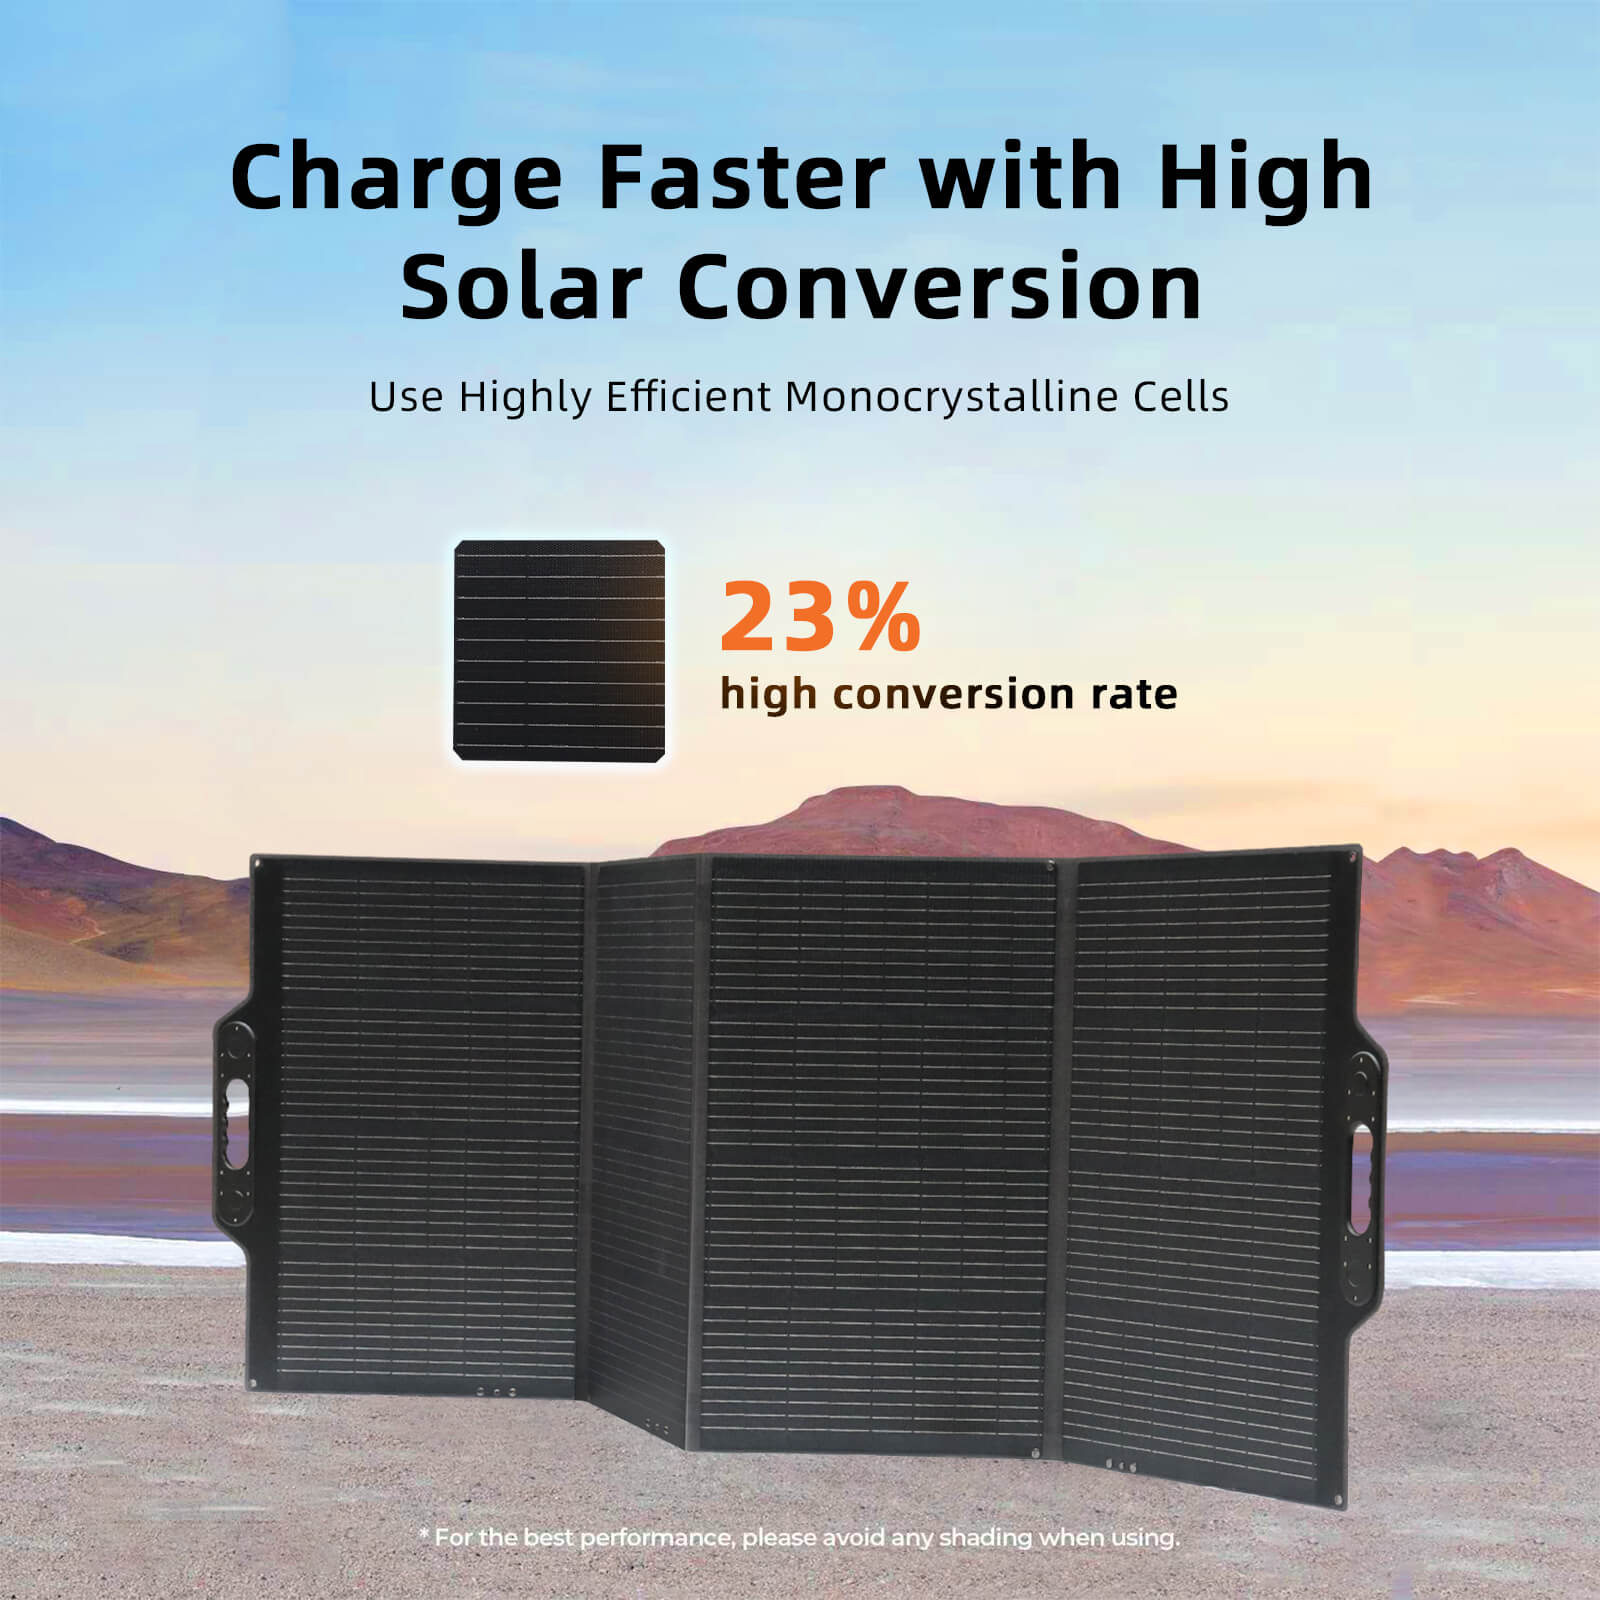 Solarparts@ Mono integrated foldable solar charger  35.2V/315W